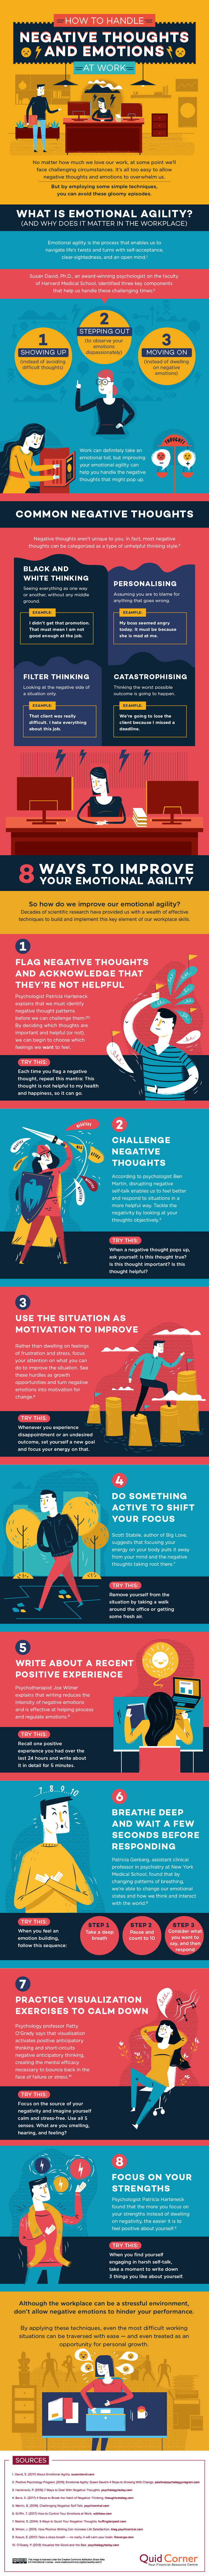 How to Handle Negative Thoughts and Emotions at Work - #infographic